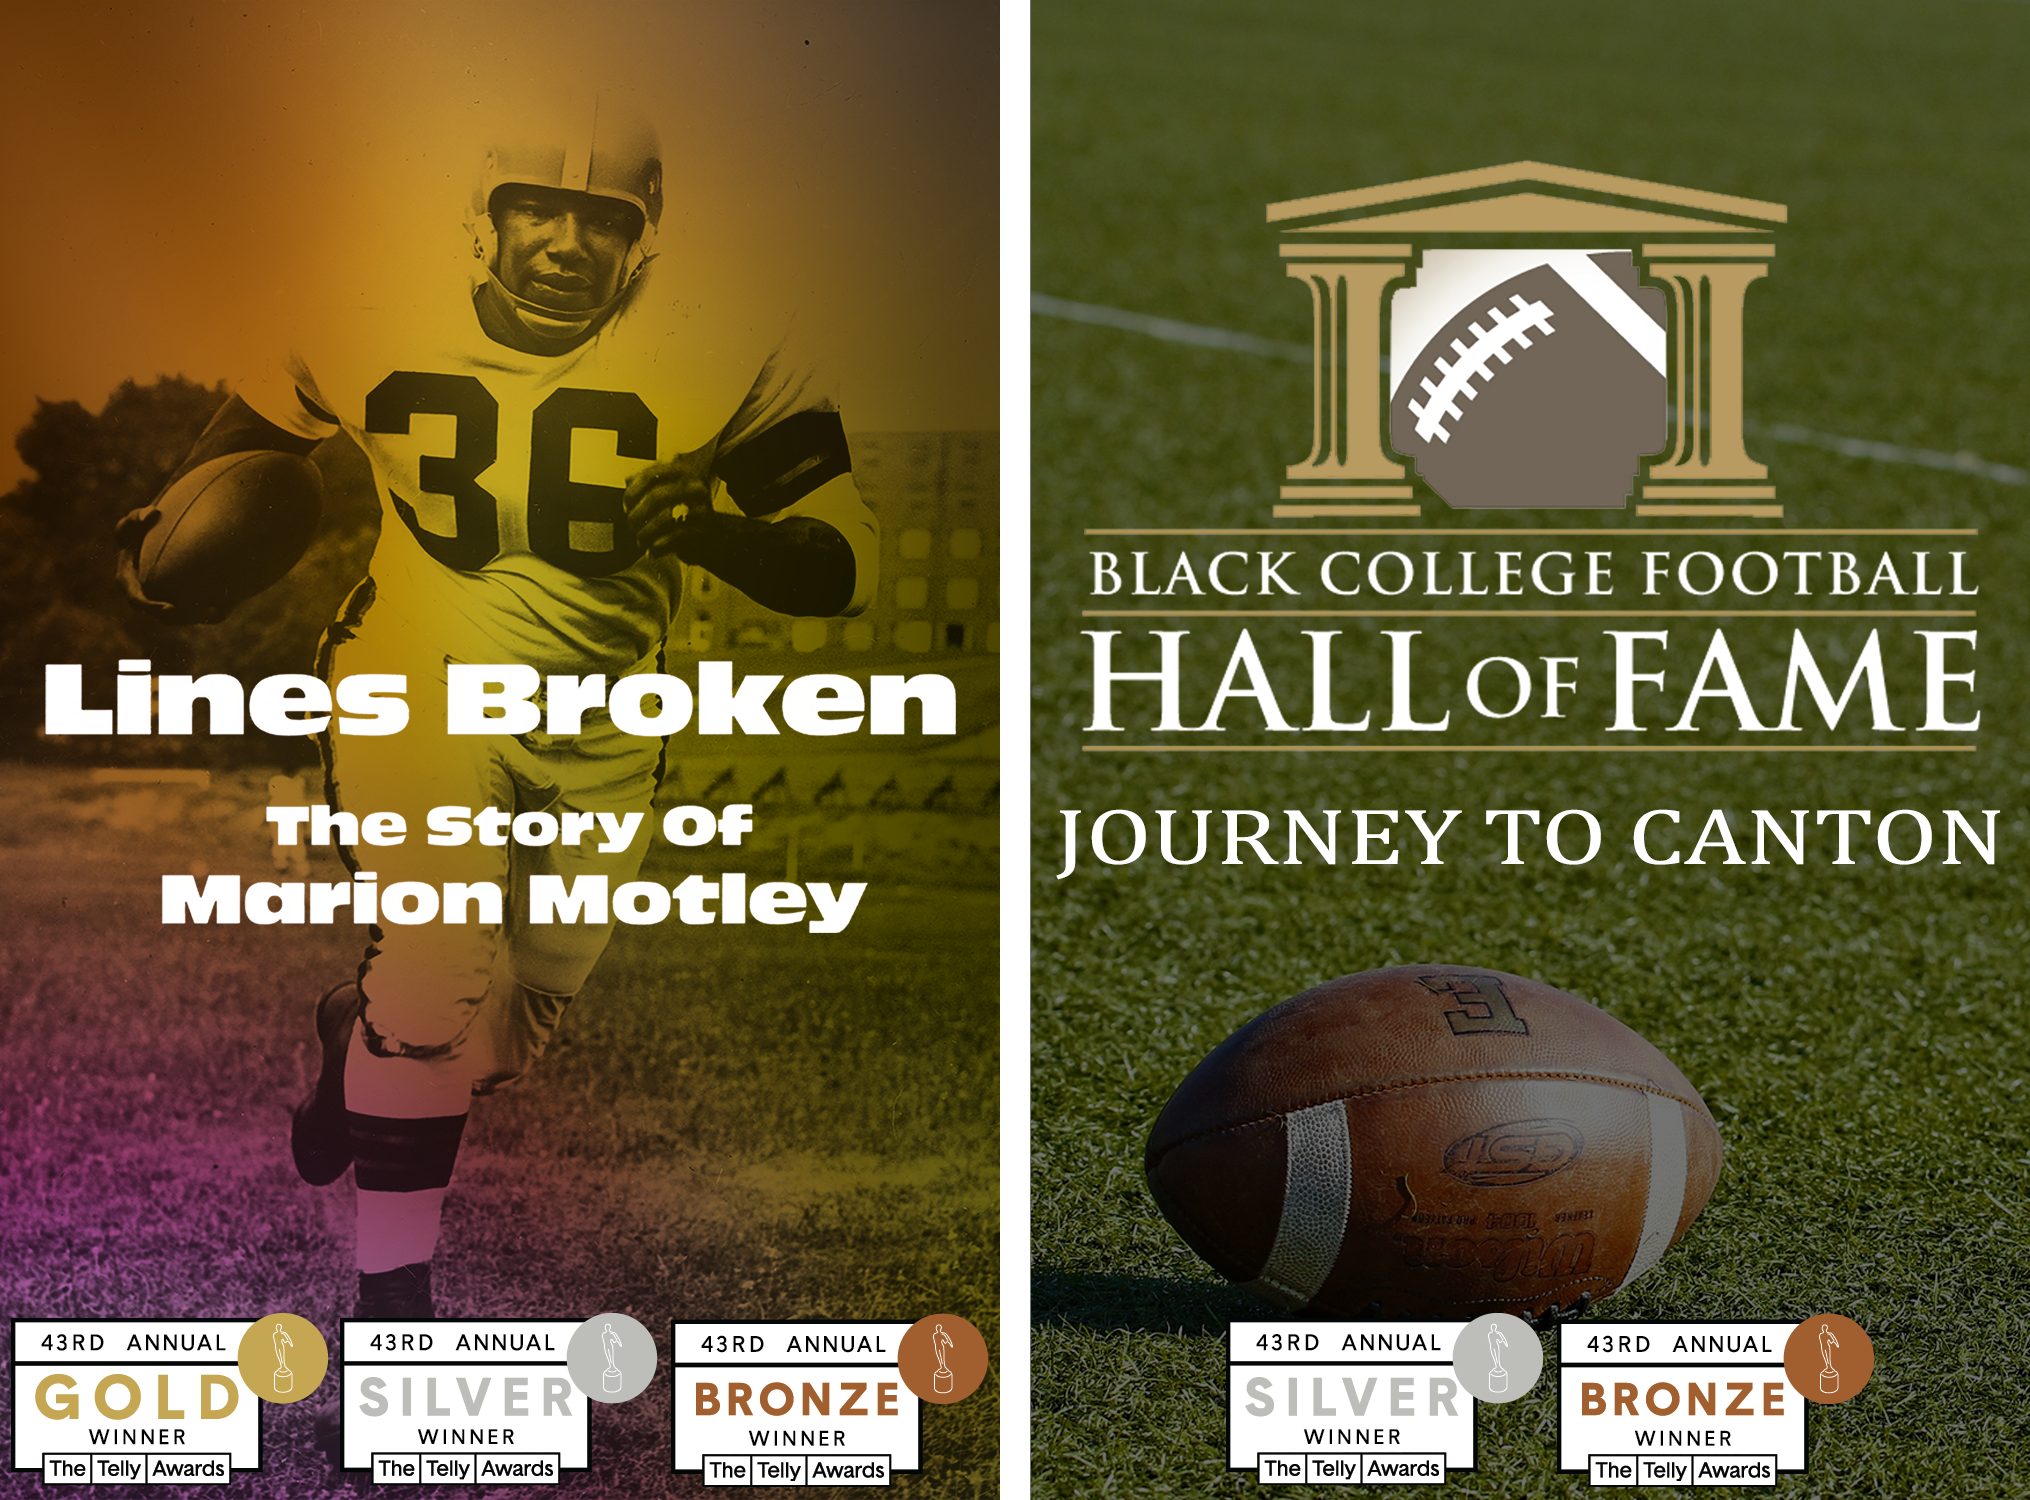 Two of our documentaries—LINES BROKEN: THE STORY OF MARION MOTLEY and BLACK COLLEGE FOOTBALL HALL OF FAME: JOURNEY TO CANTON—have won multiple Telly Awards!